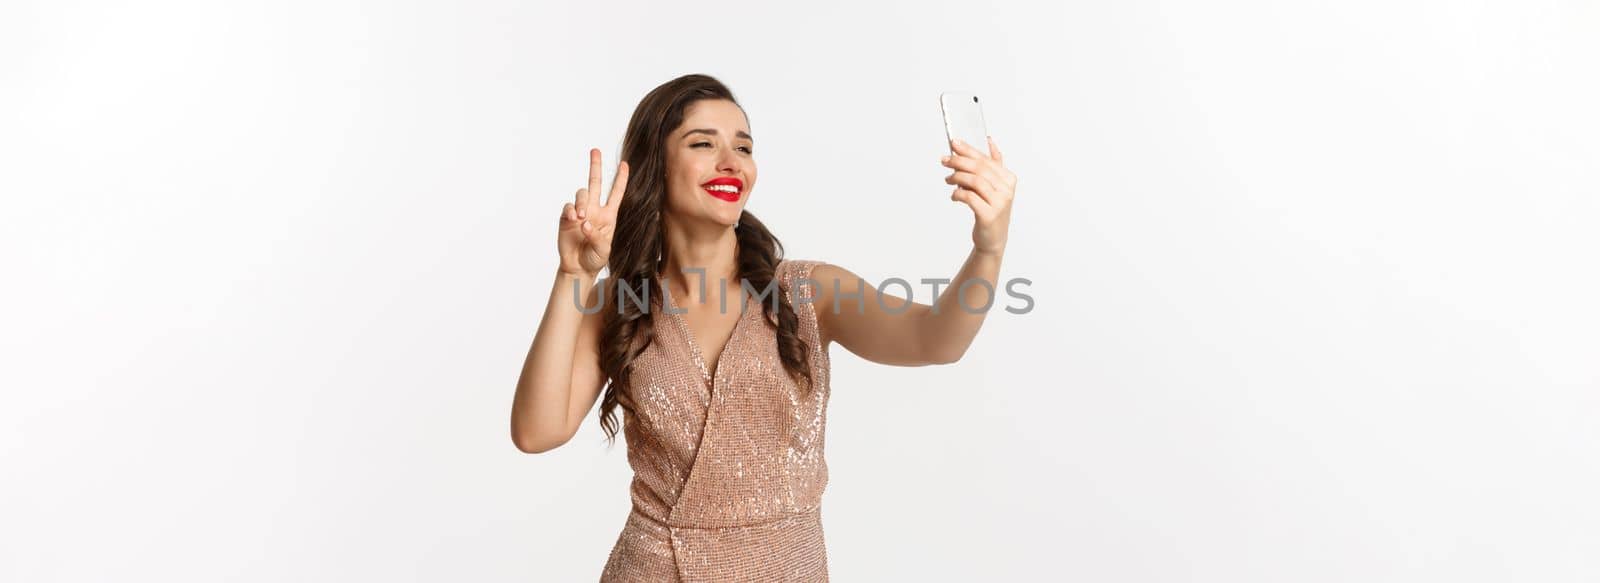 Attractive woman in luxury dress showing peace sign at phone camera, taking selfie on smartphone, posing in christmas party outfit, standing over white background.